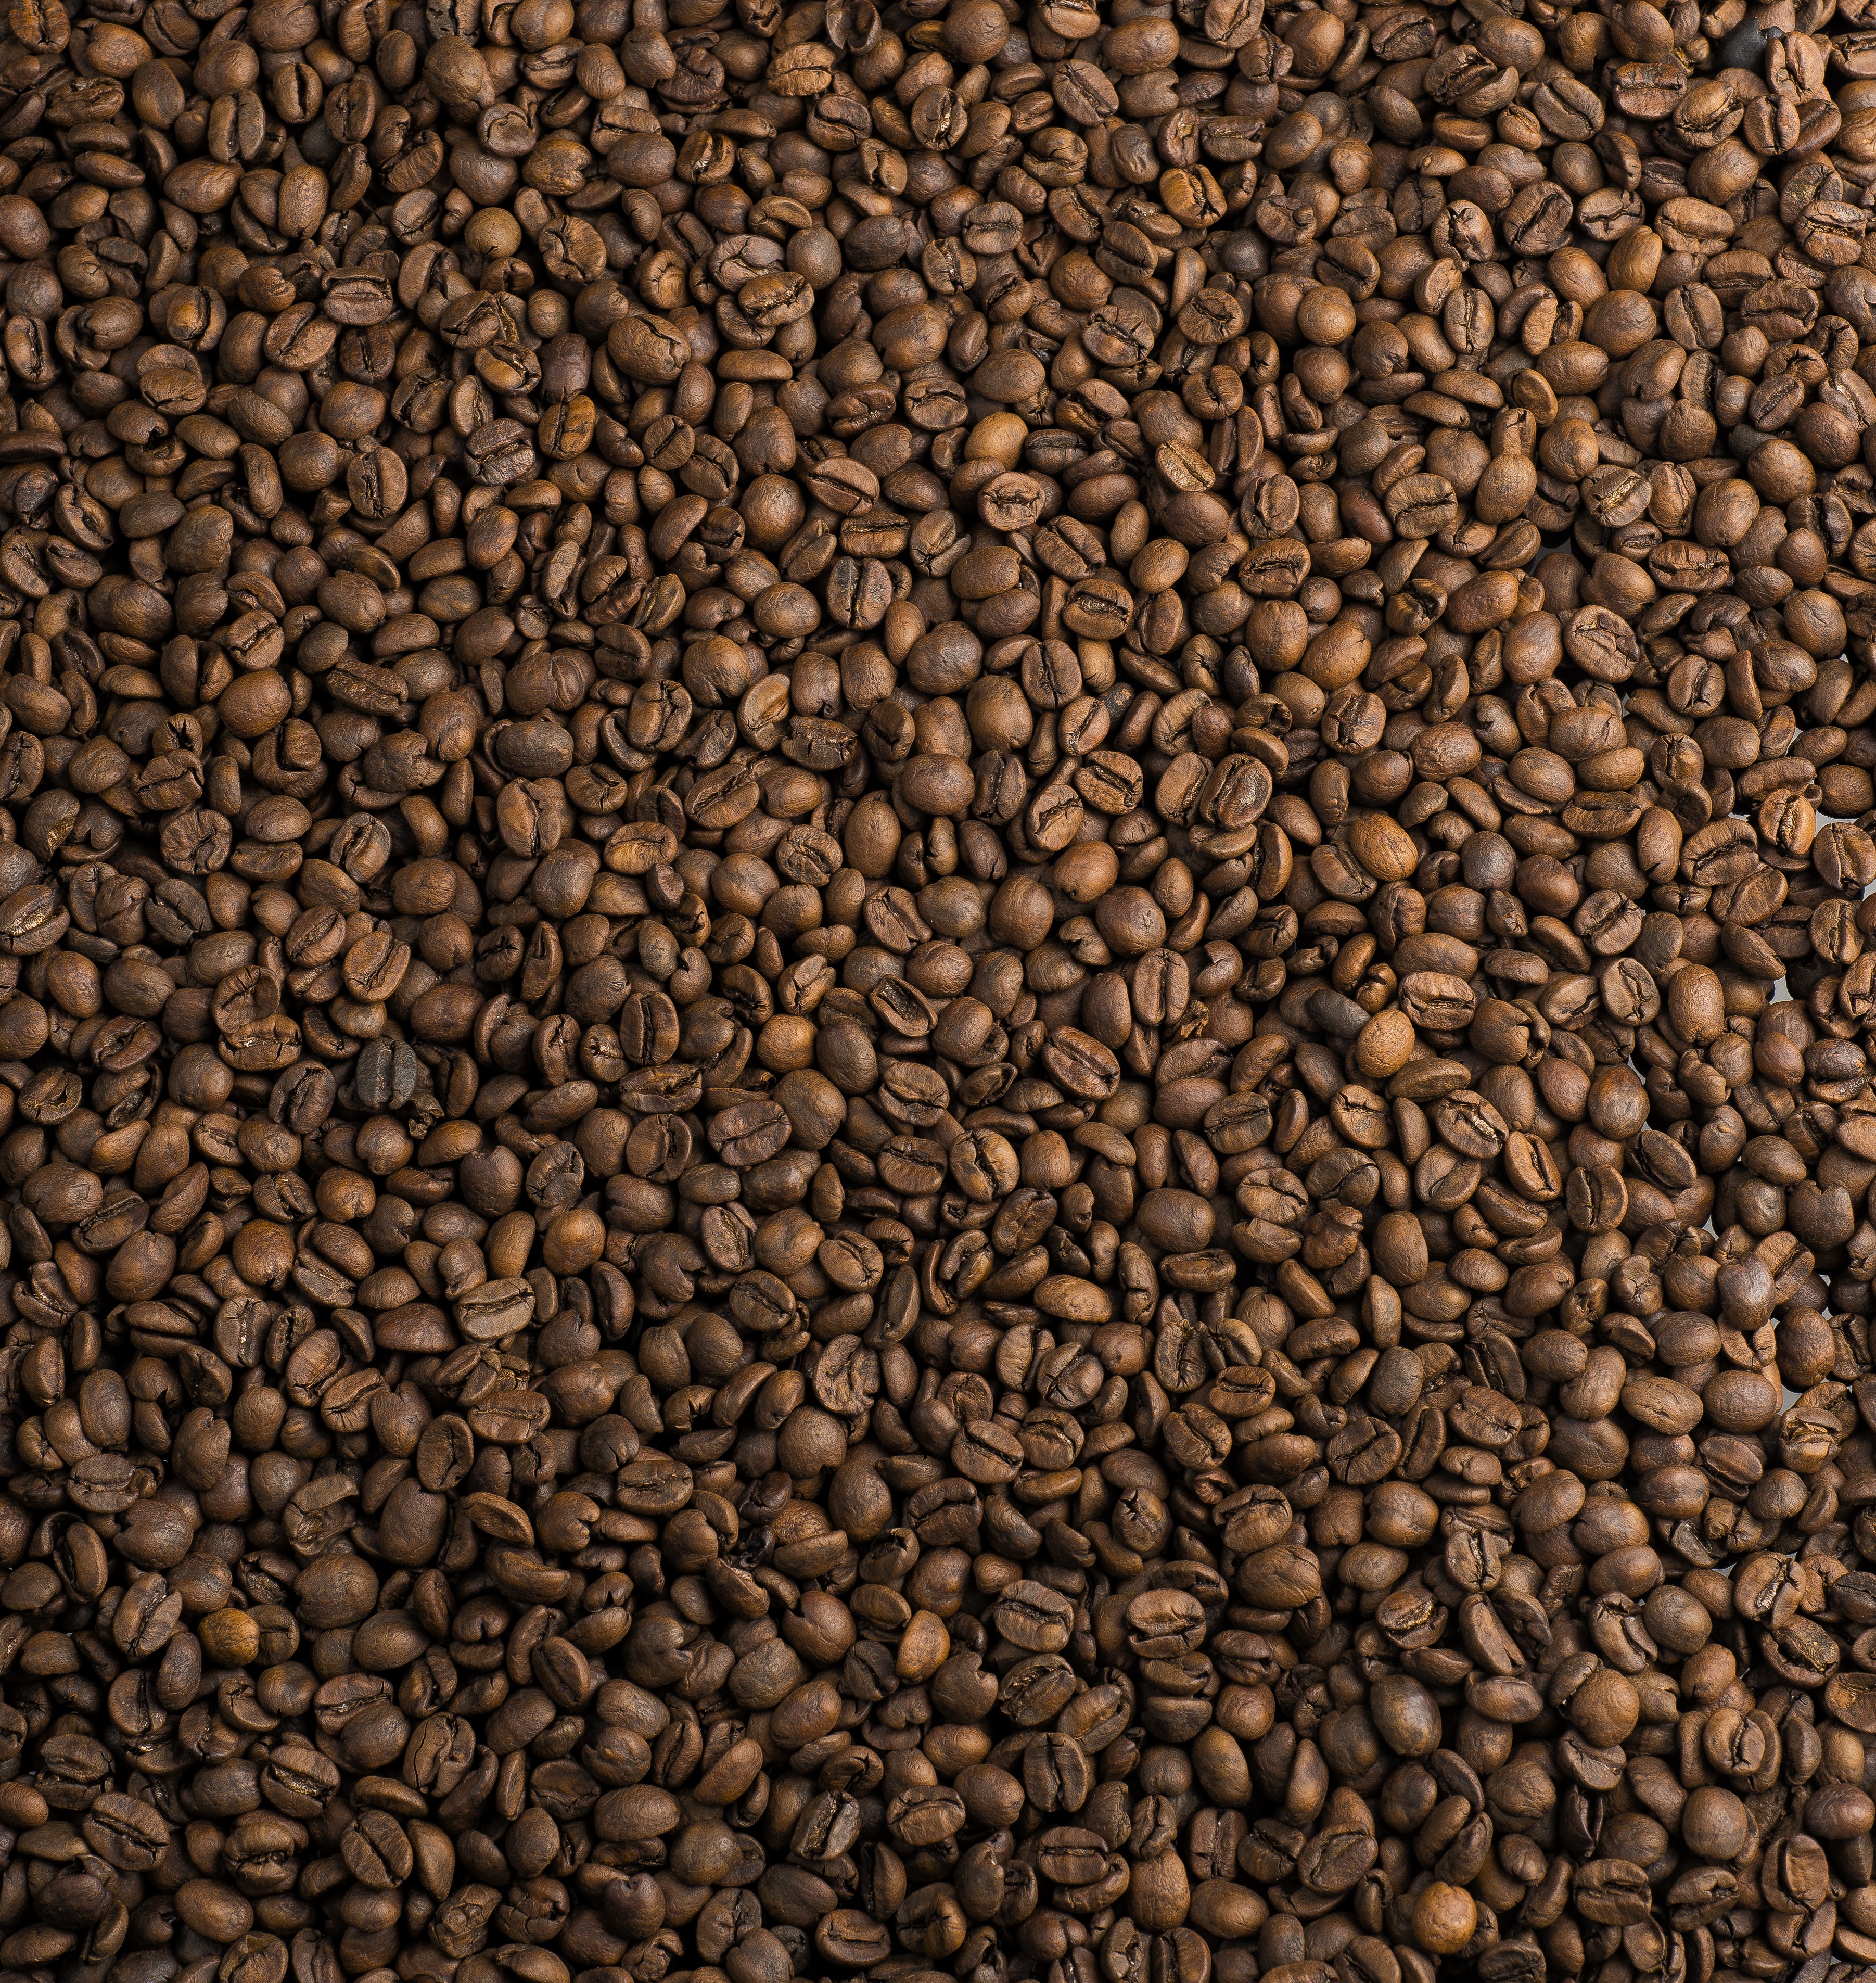 textures, café, coffee, texture, coffee beans, fried, roasted, coffee house phone background